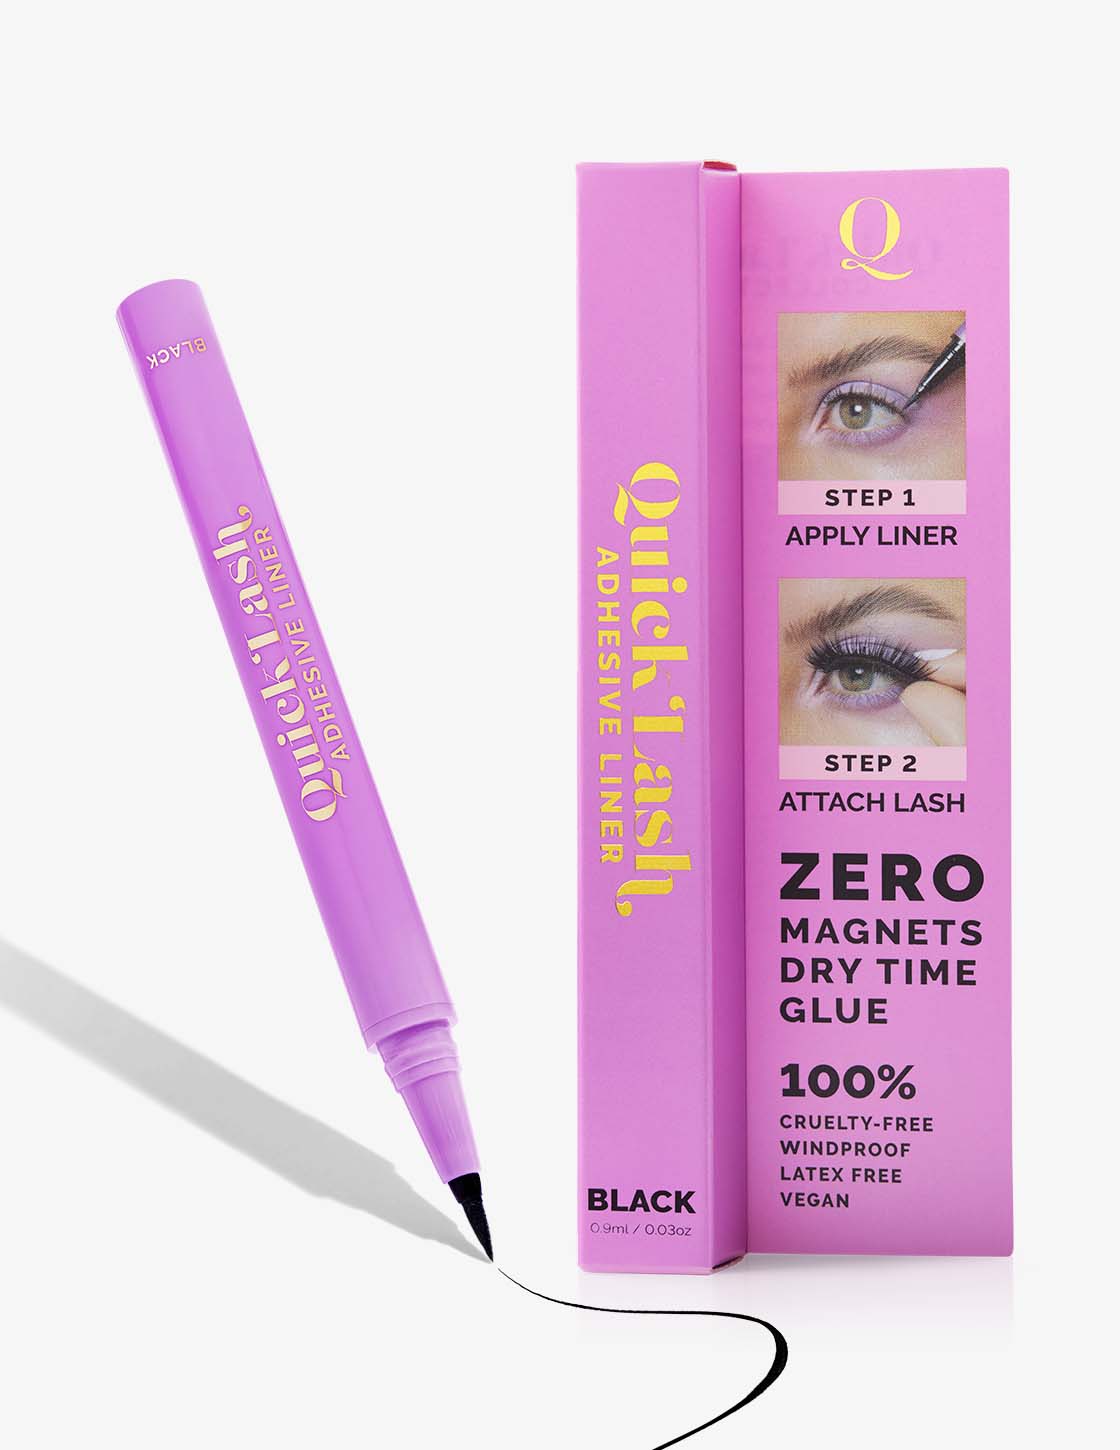 Hand holding Quick Lash - Our Clear Adhesive Lash Liner. 